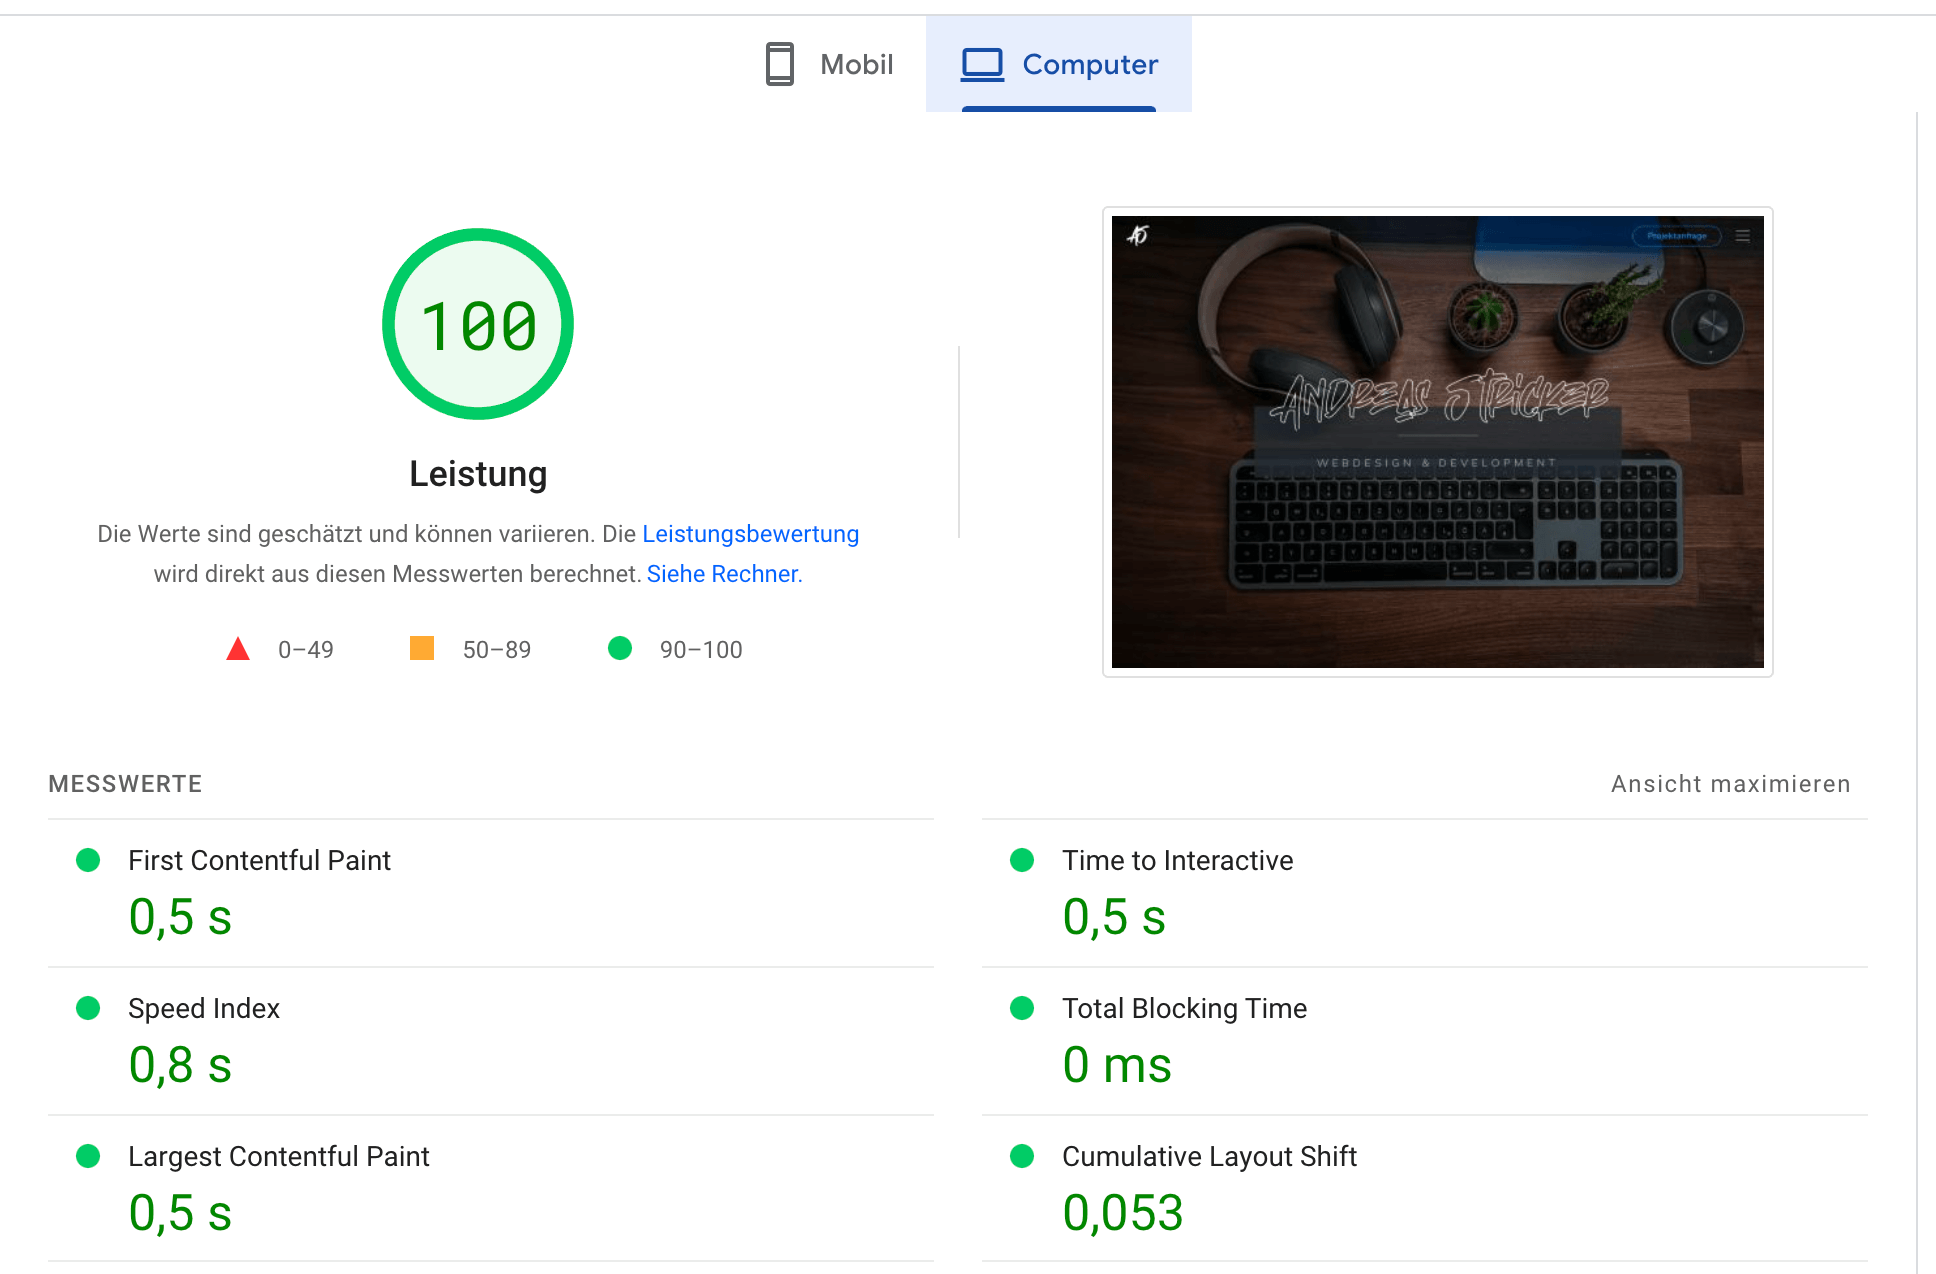 Google Pagespeed Score of 100